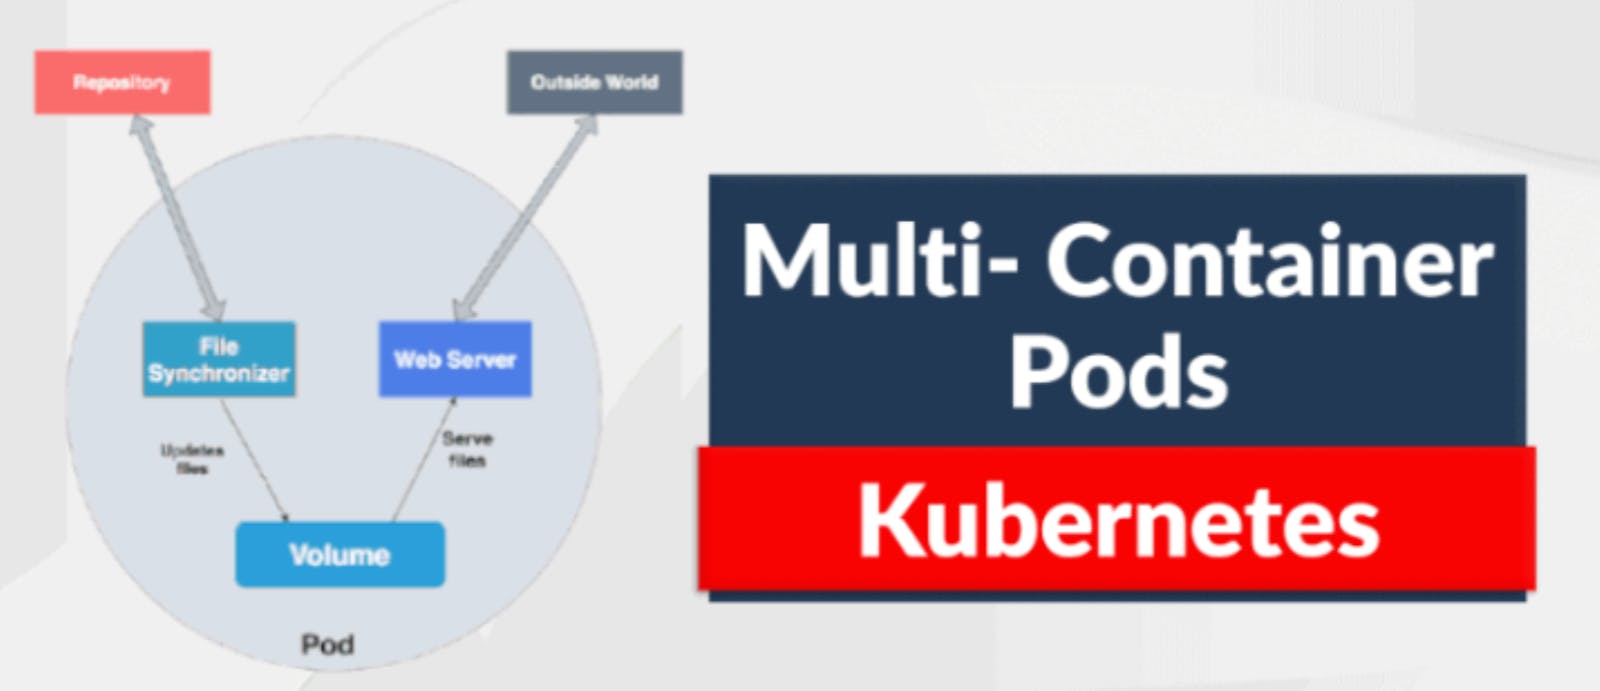 Exploring Multi-Container pod in Kubernetes